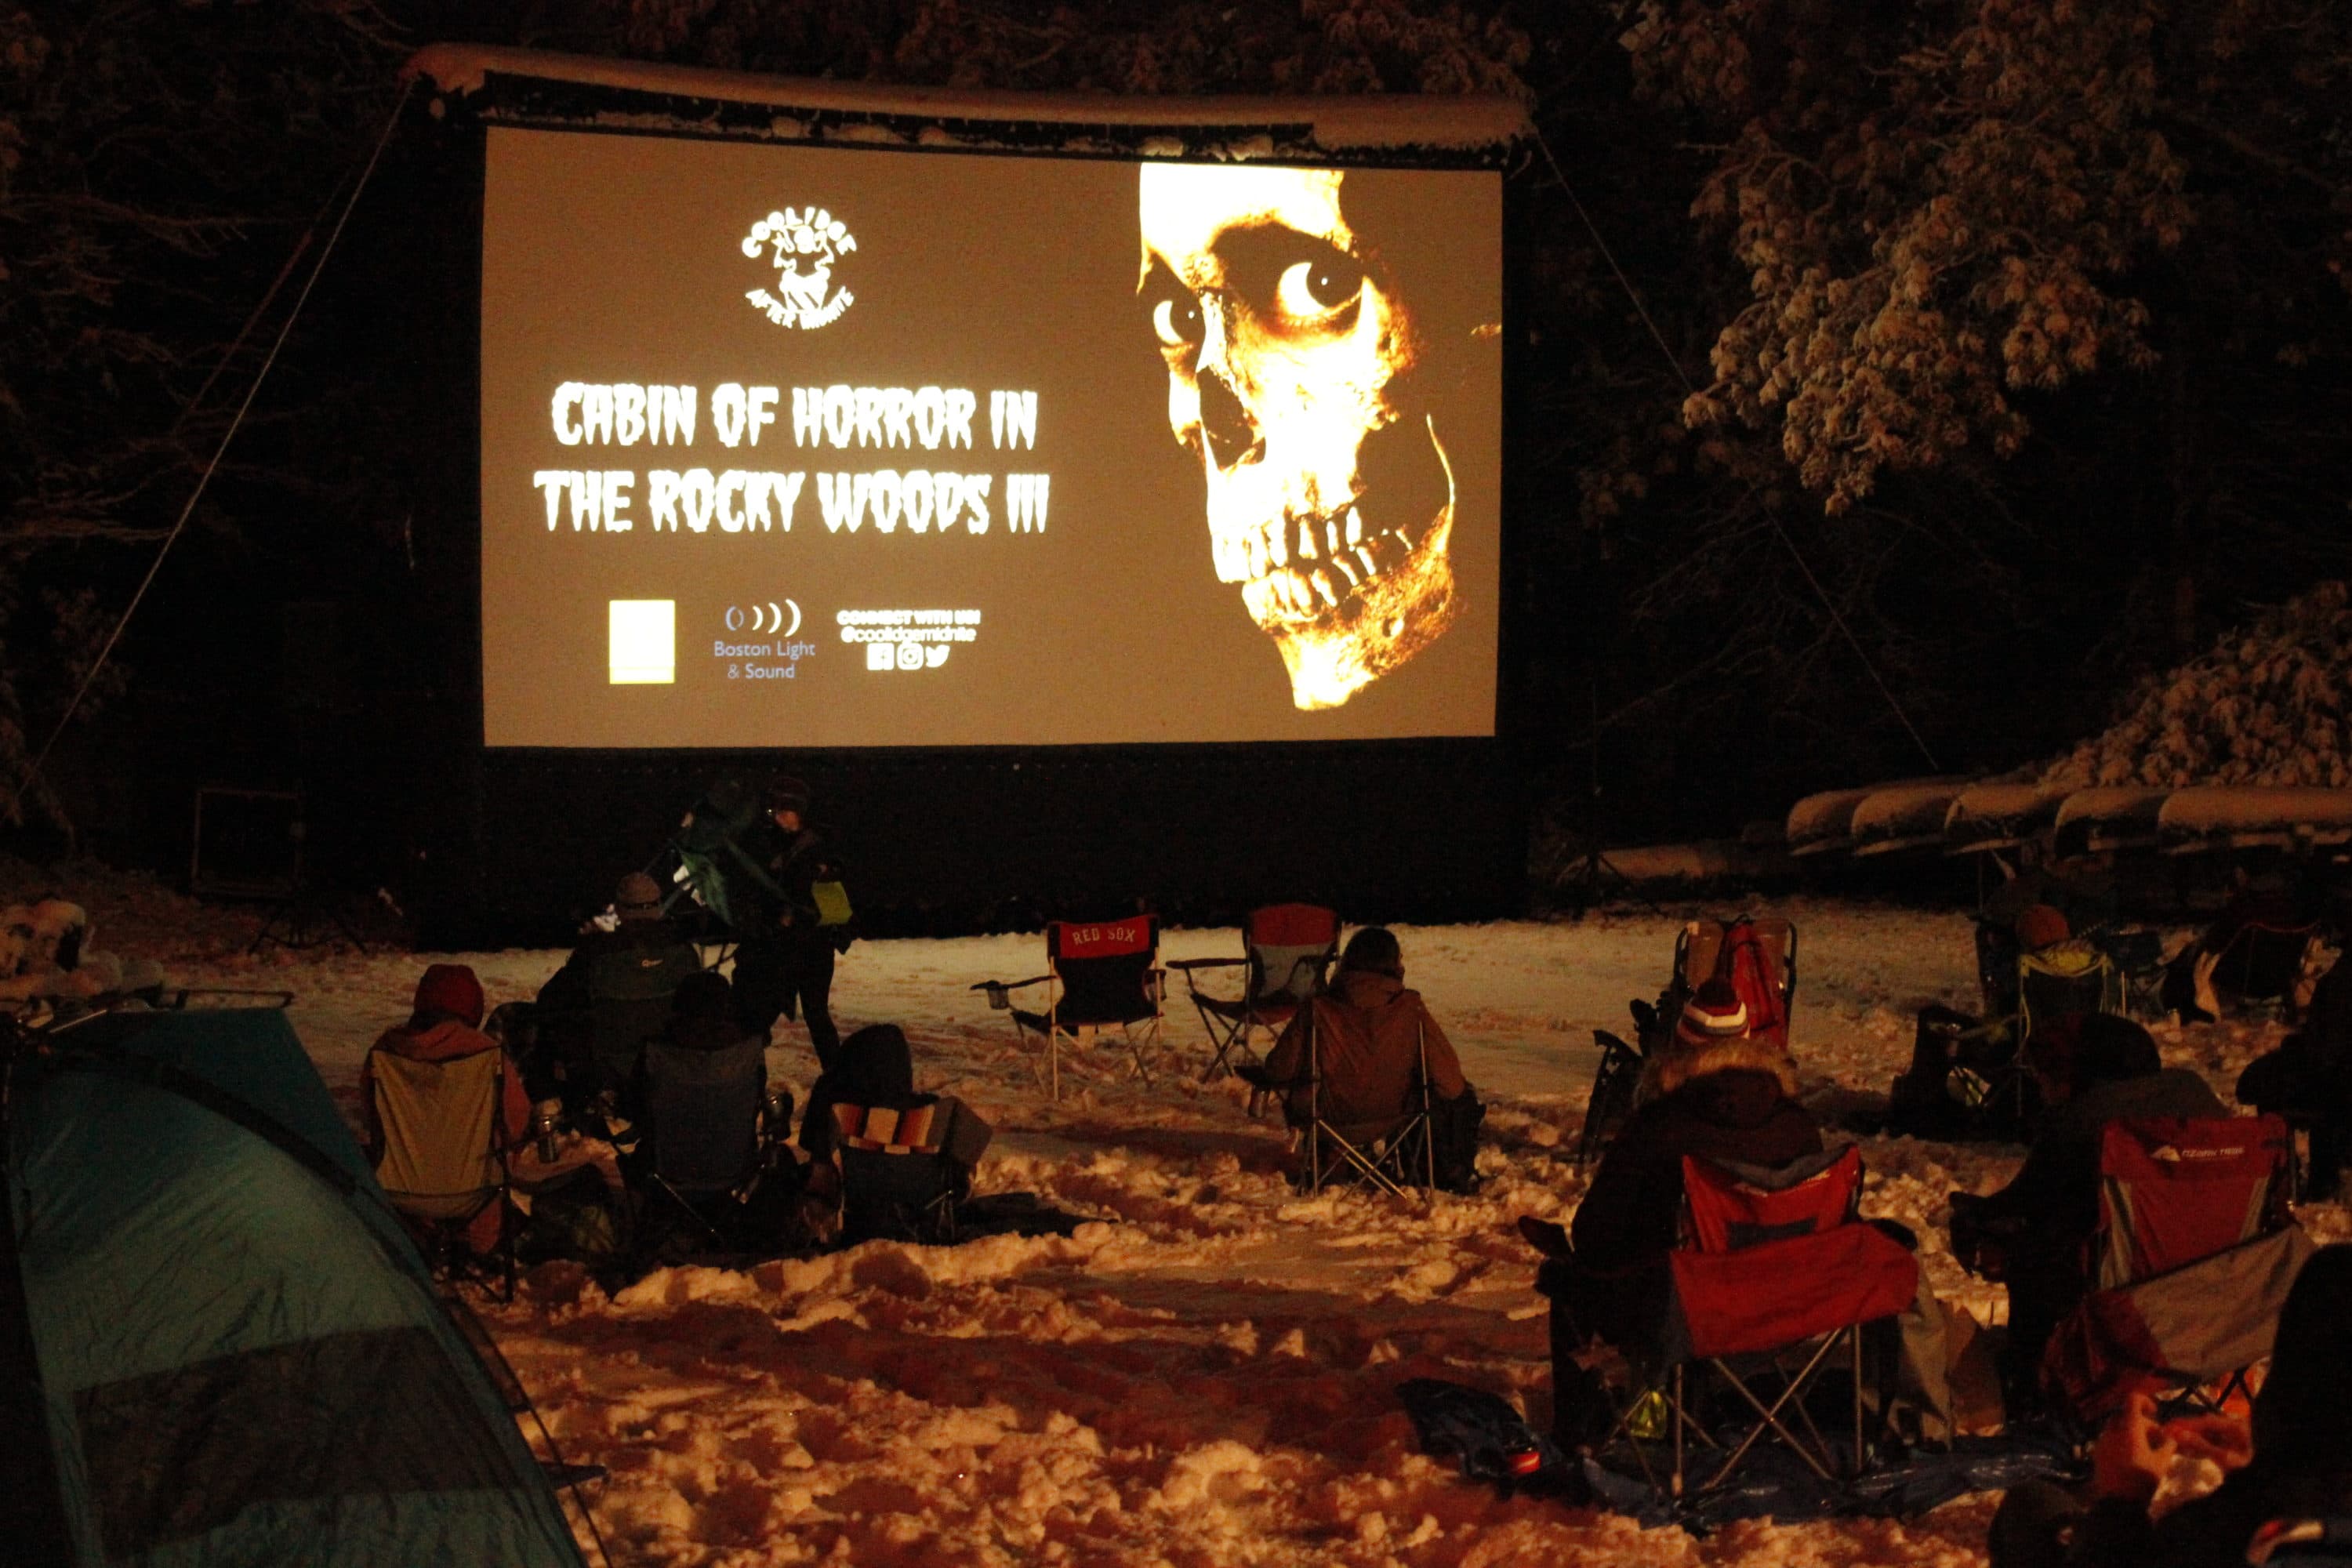 Campers watched horror films curated by the Coolidge Corner Theater in the snow. (Jenn Stanley/WBUR)